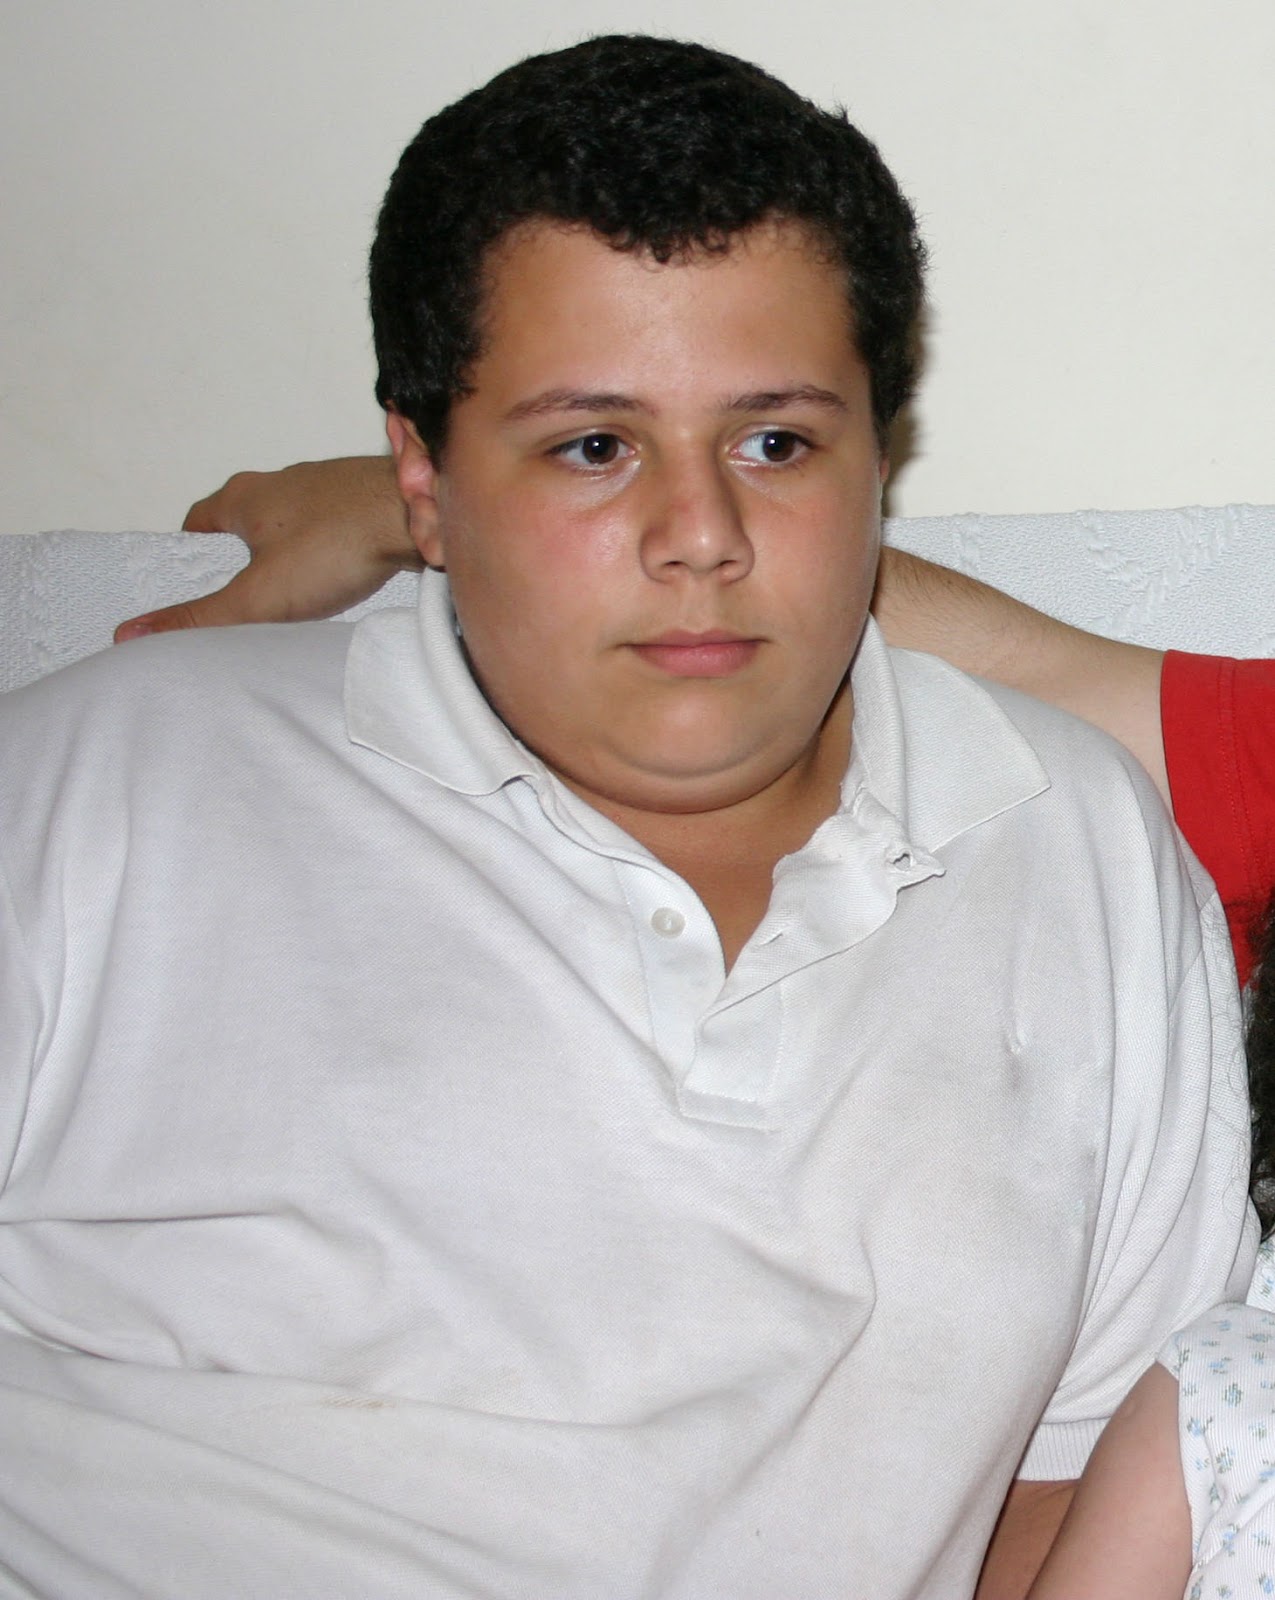 morbidly obese child